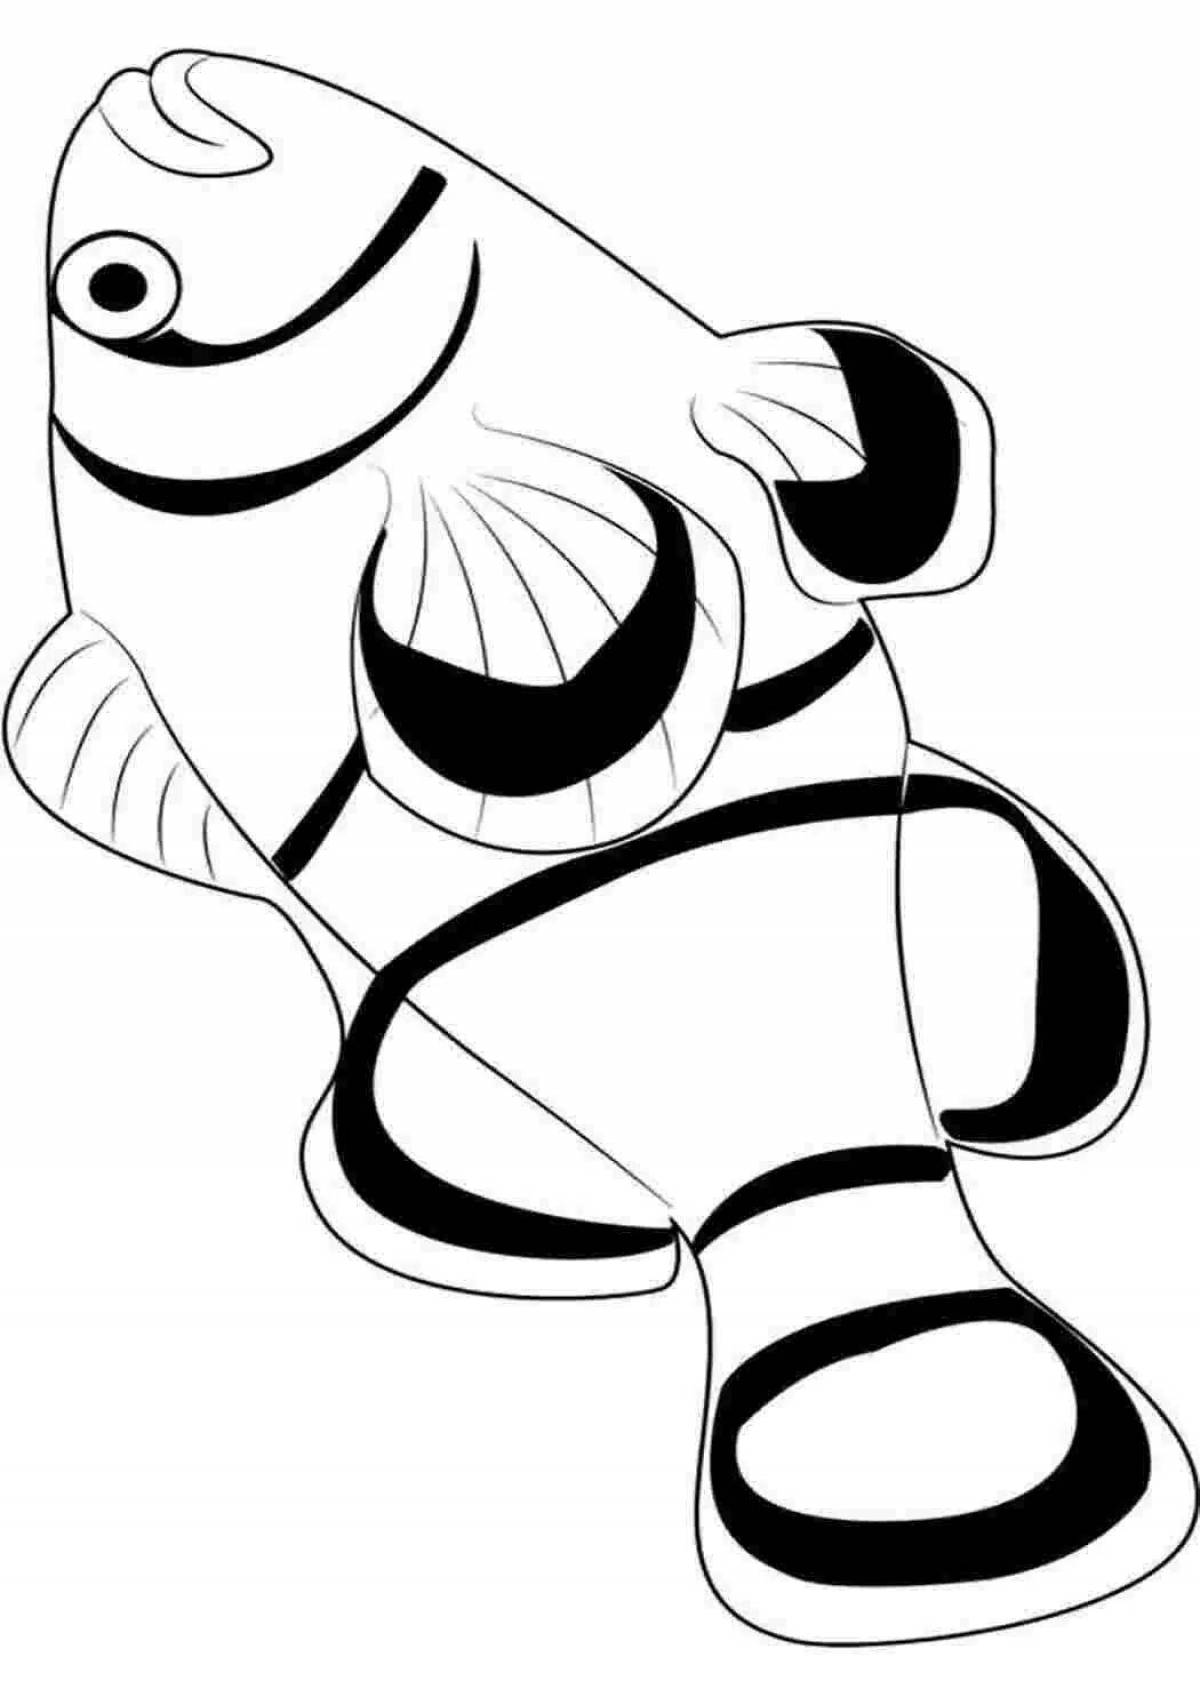 Bright clownfish coloring book for kids